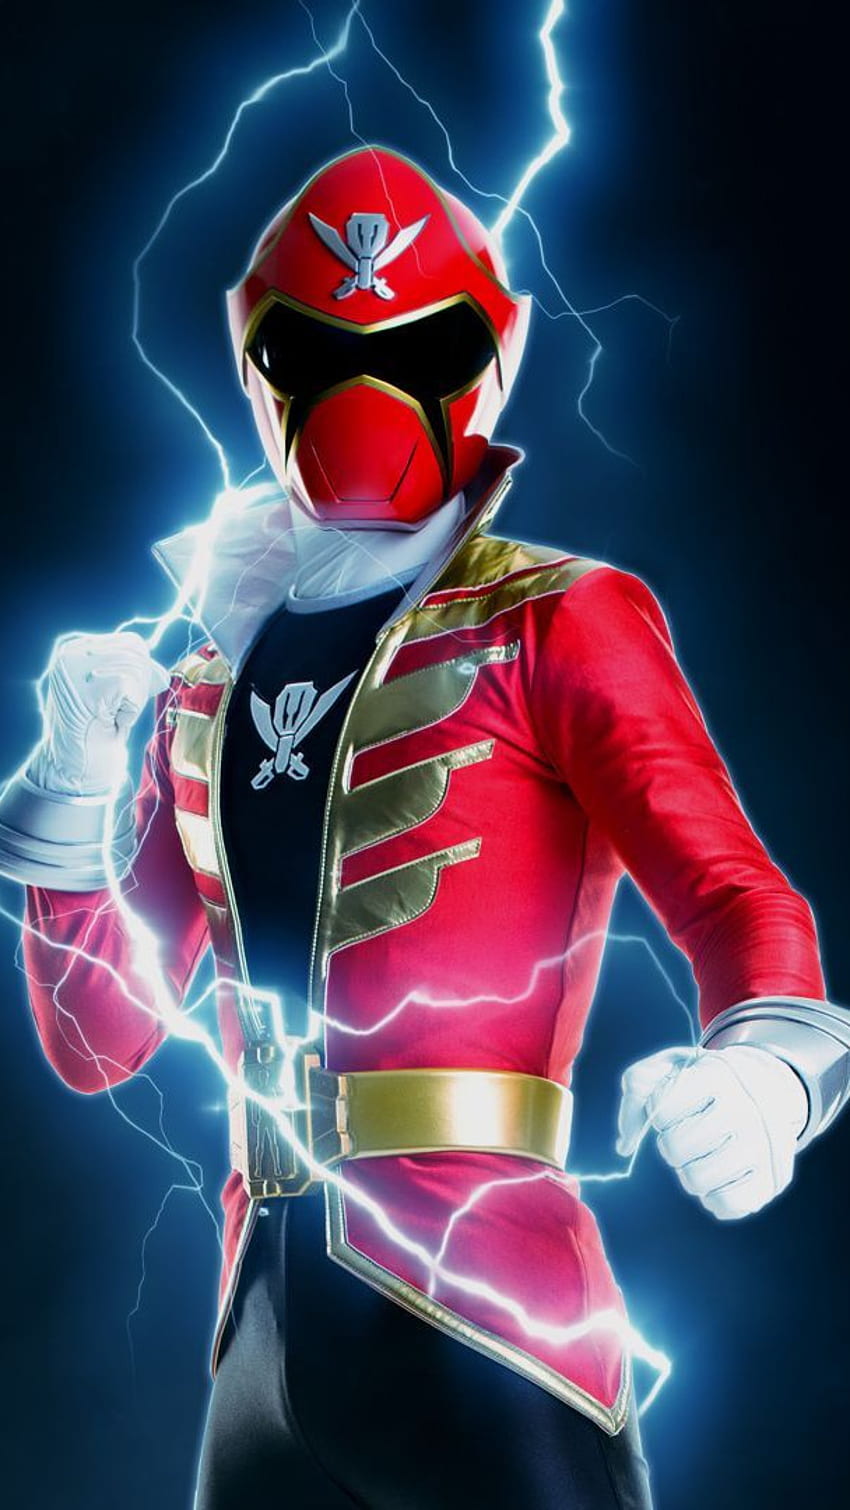 Go Go Loser Ranger Why Power Rangers Fans Should Pay Attention to This  Anime SpinOff